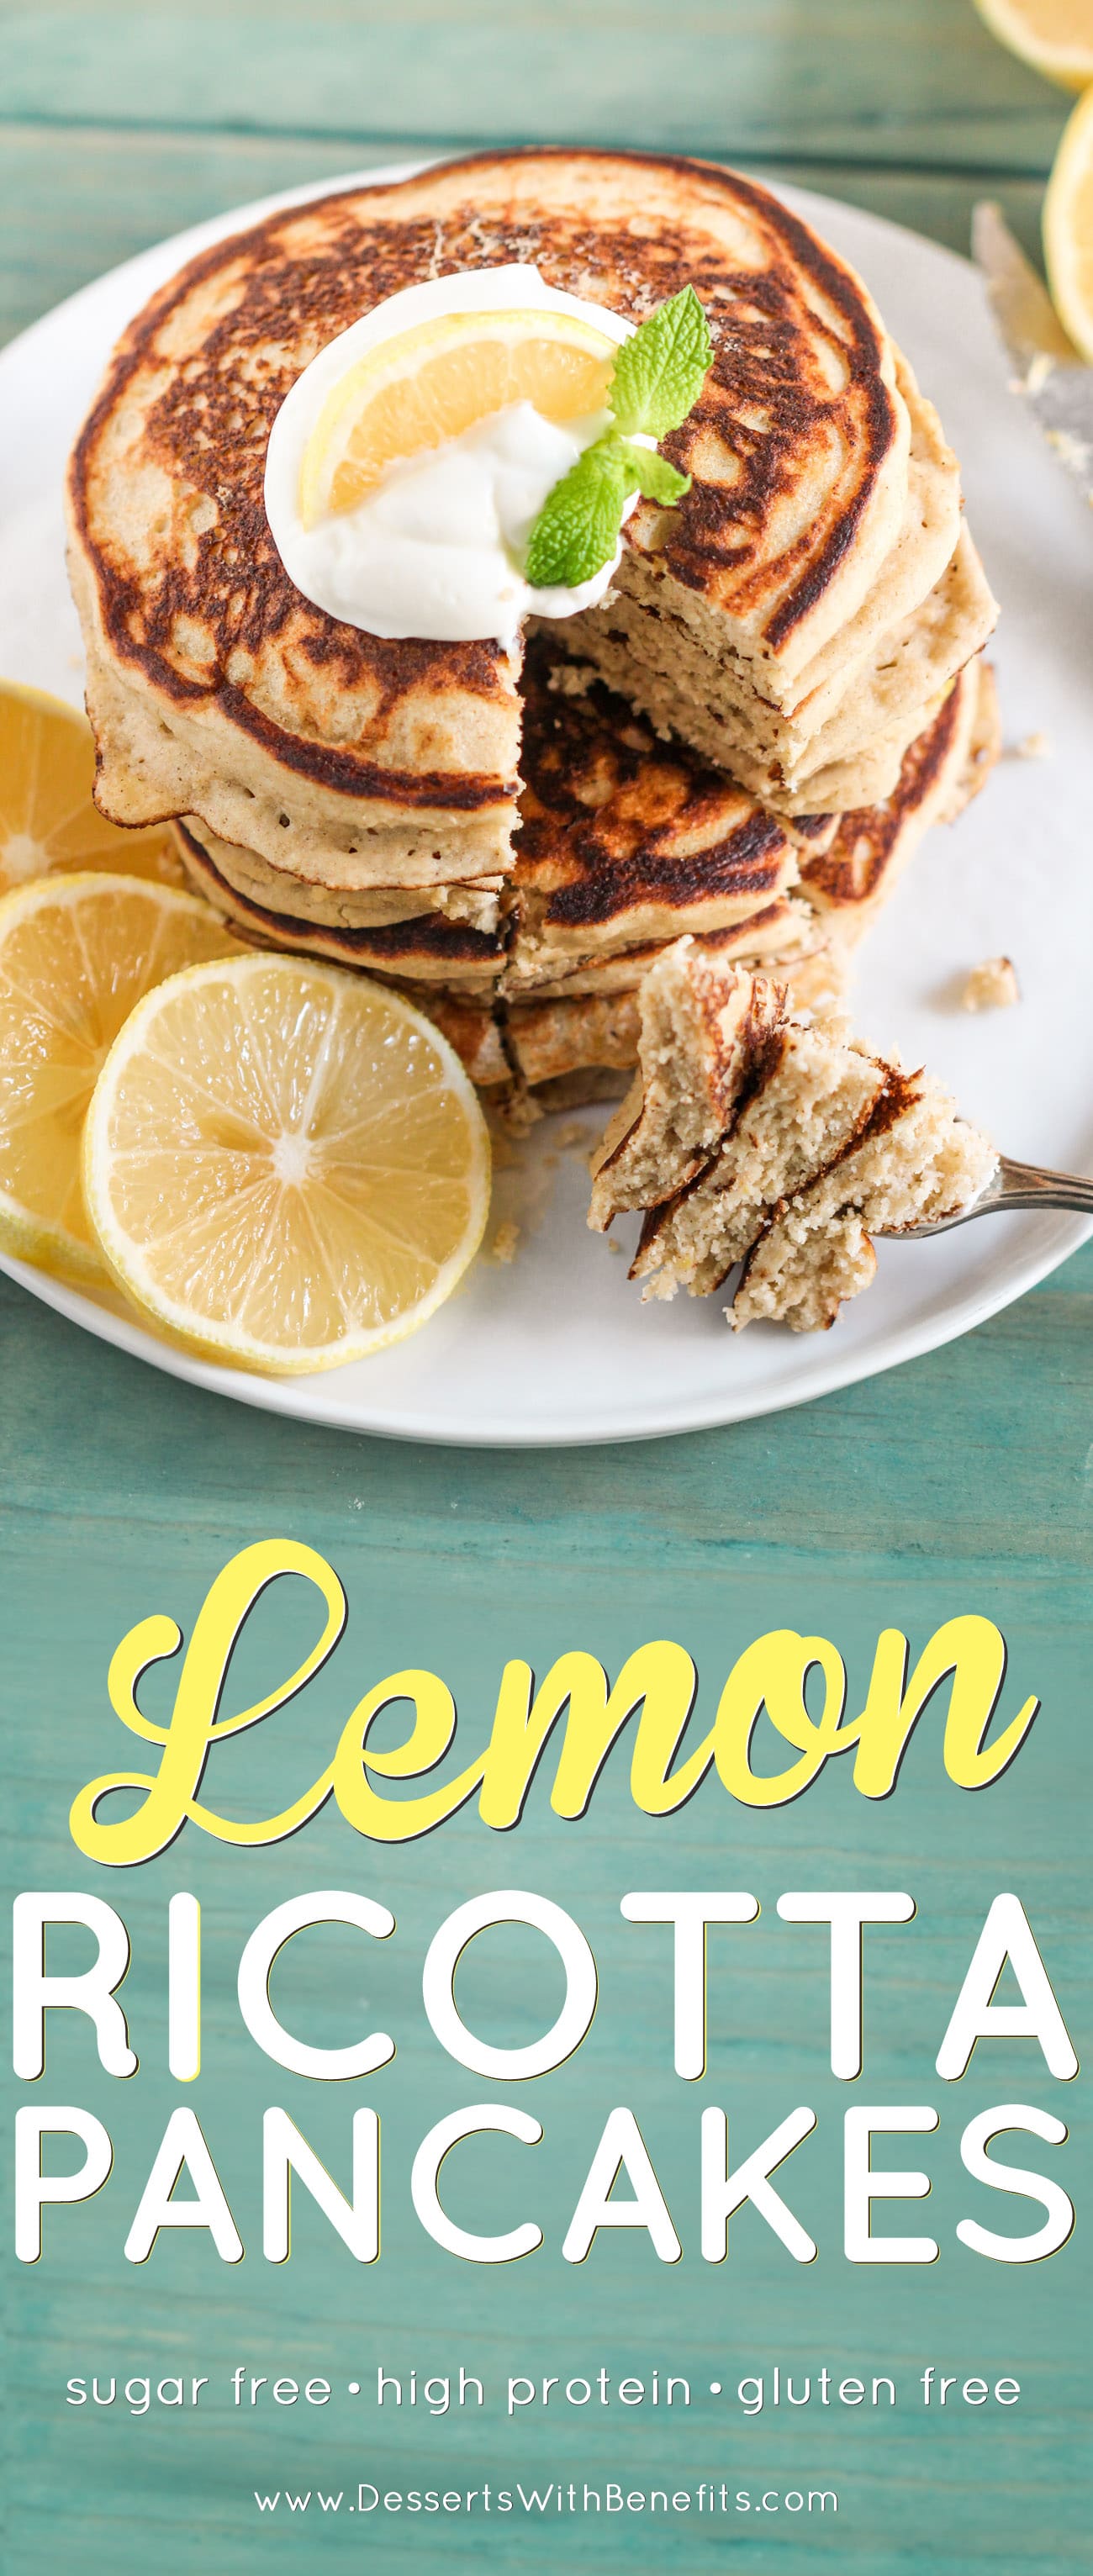 These Healthy Lemon Ricotta Buttermilk Pancakes are so fluffy and cakey and sweet and delicious, it's hard to believe that with every bite you take, you're indulging in sugar free, high protein, gluten free, and guilt free goodness! Healthy Dessert Recipes at the Desserts With Benefits Blog (www.DessertsWithBenefits.com)